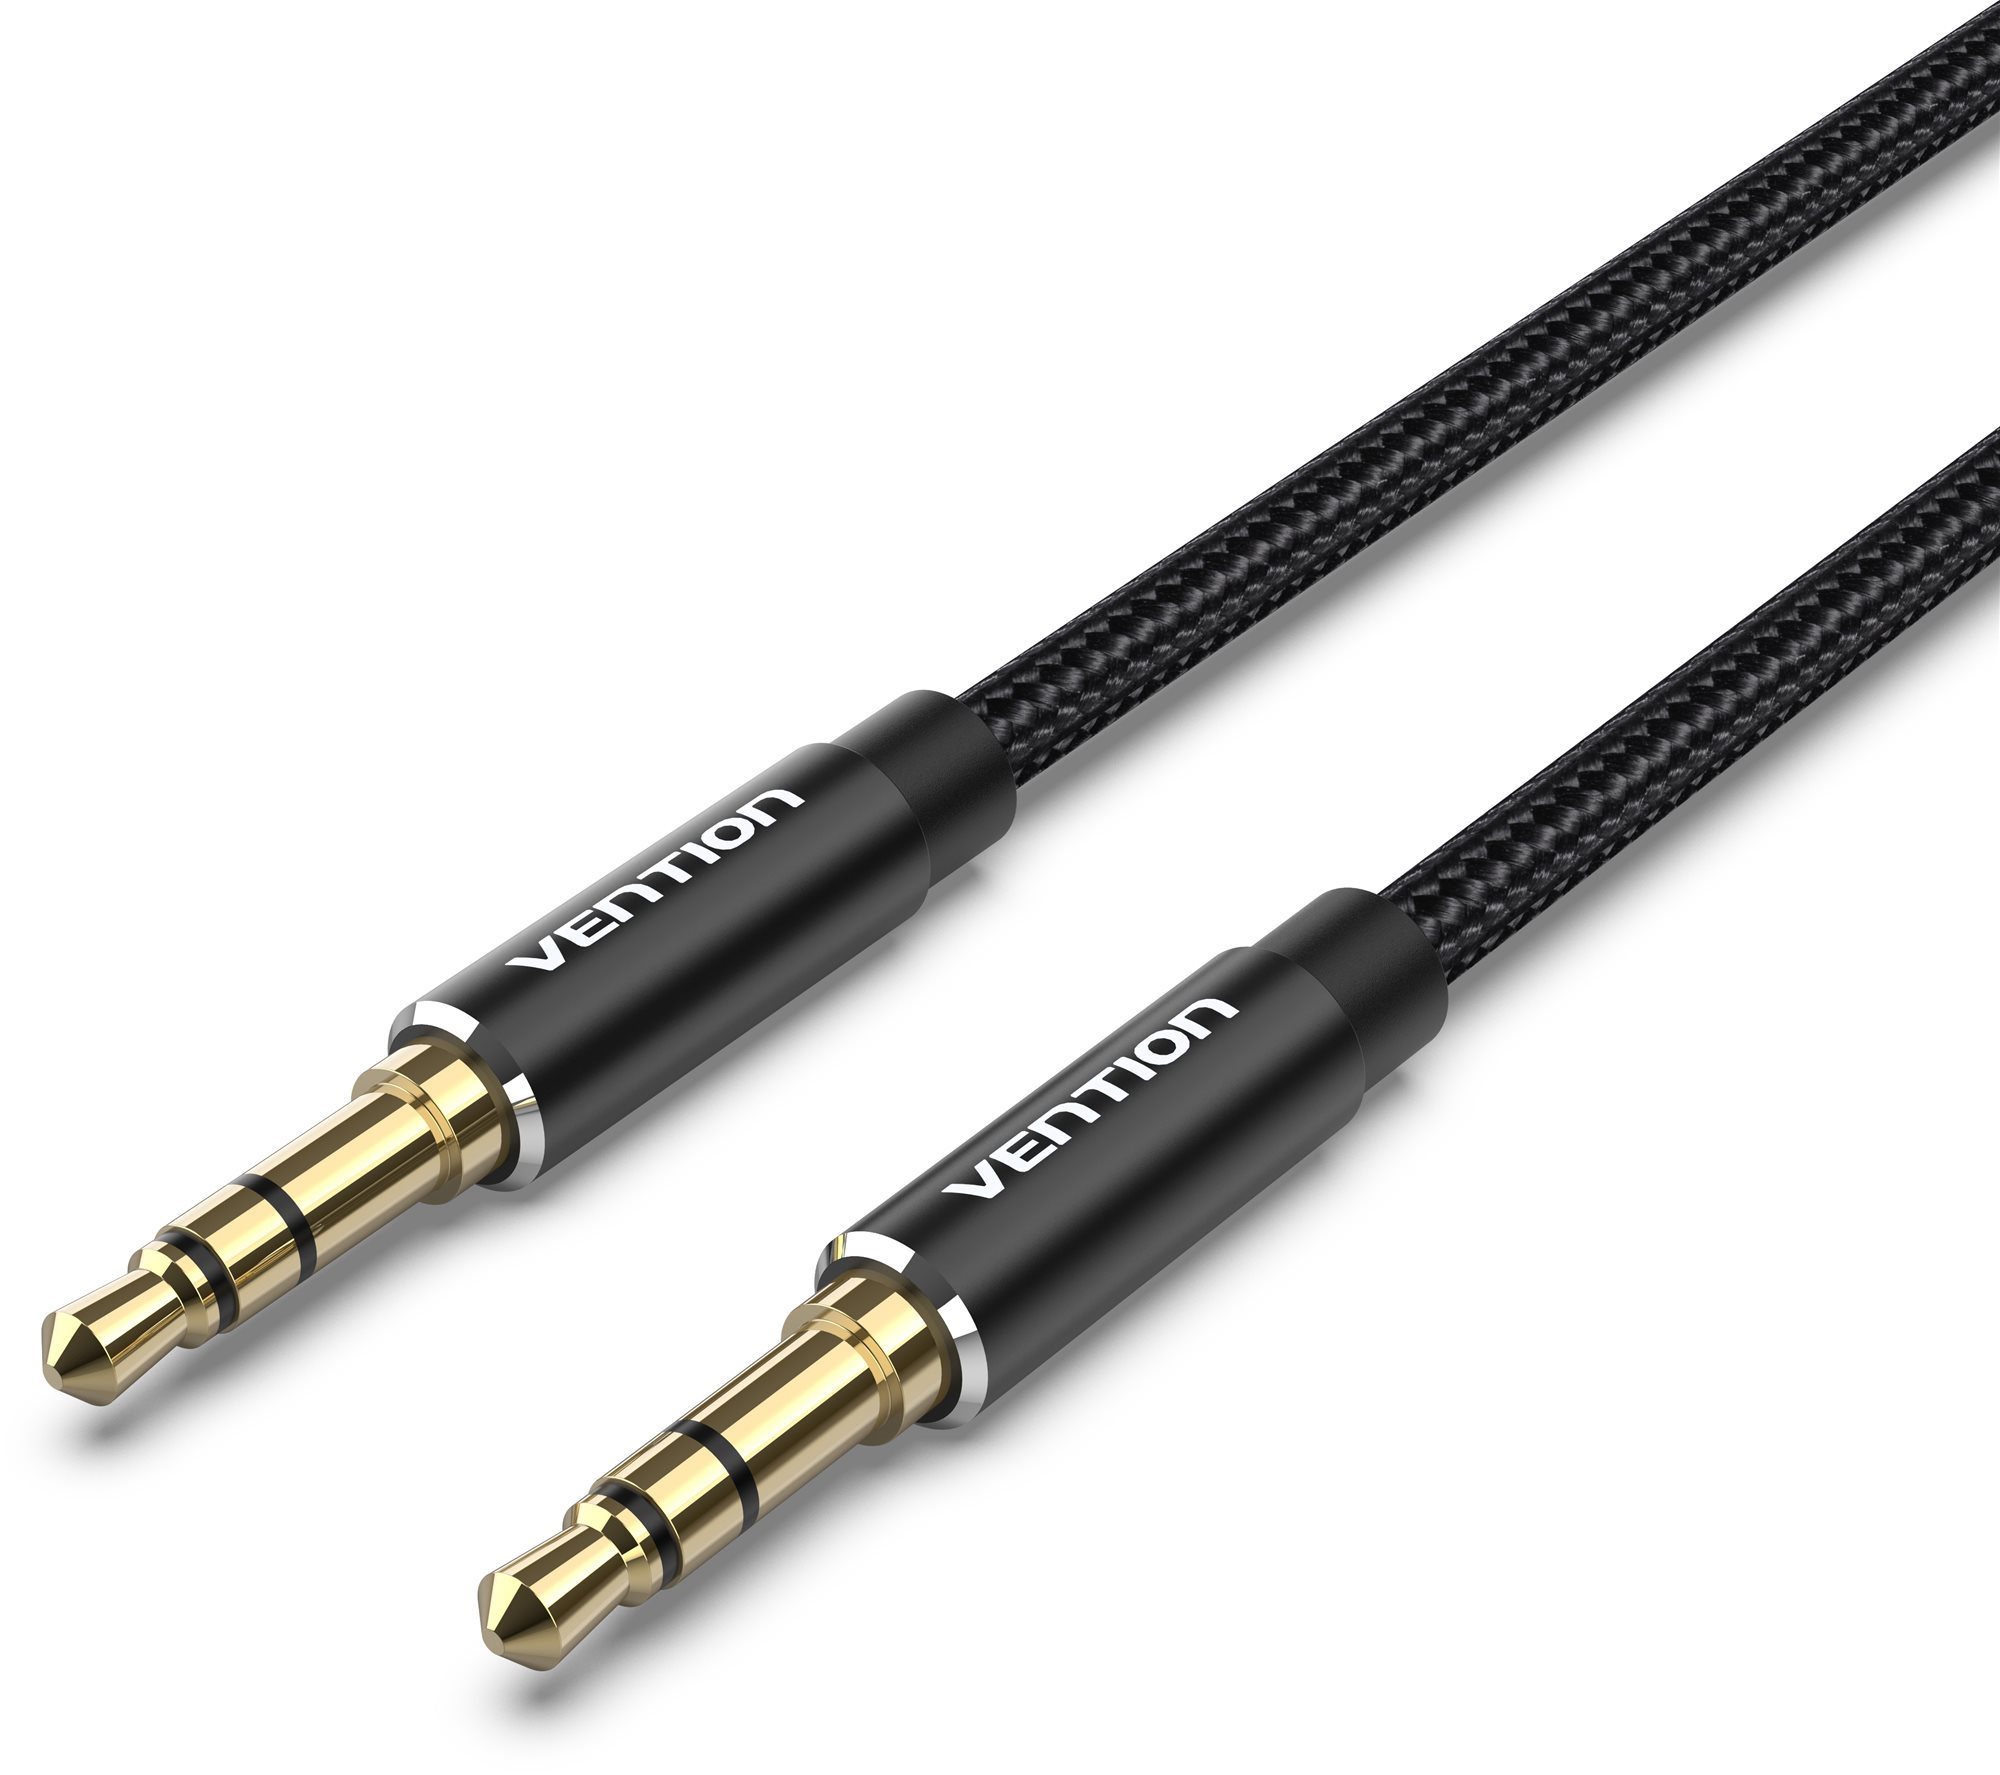 Vention Cotton Braided 3,5 mm Male to Male Audio Cable 1,5 m Black Aluminum Alloy Type